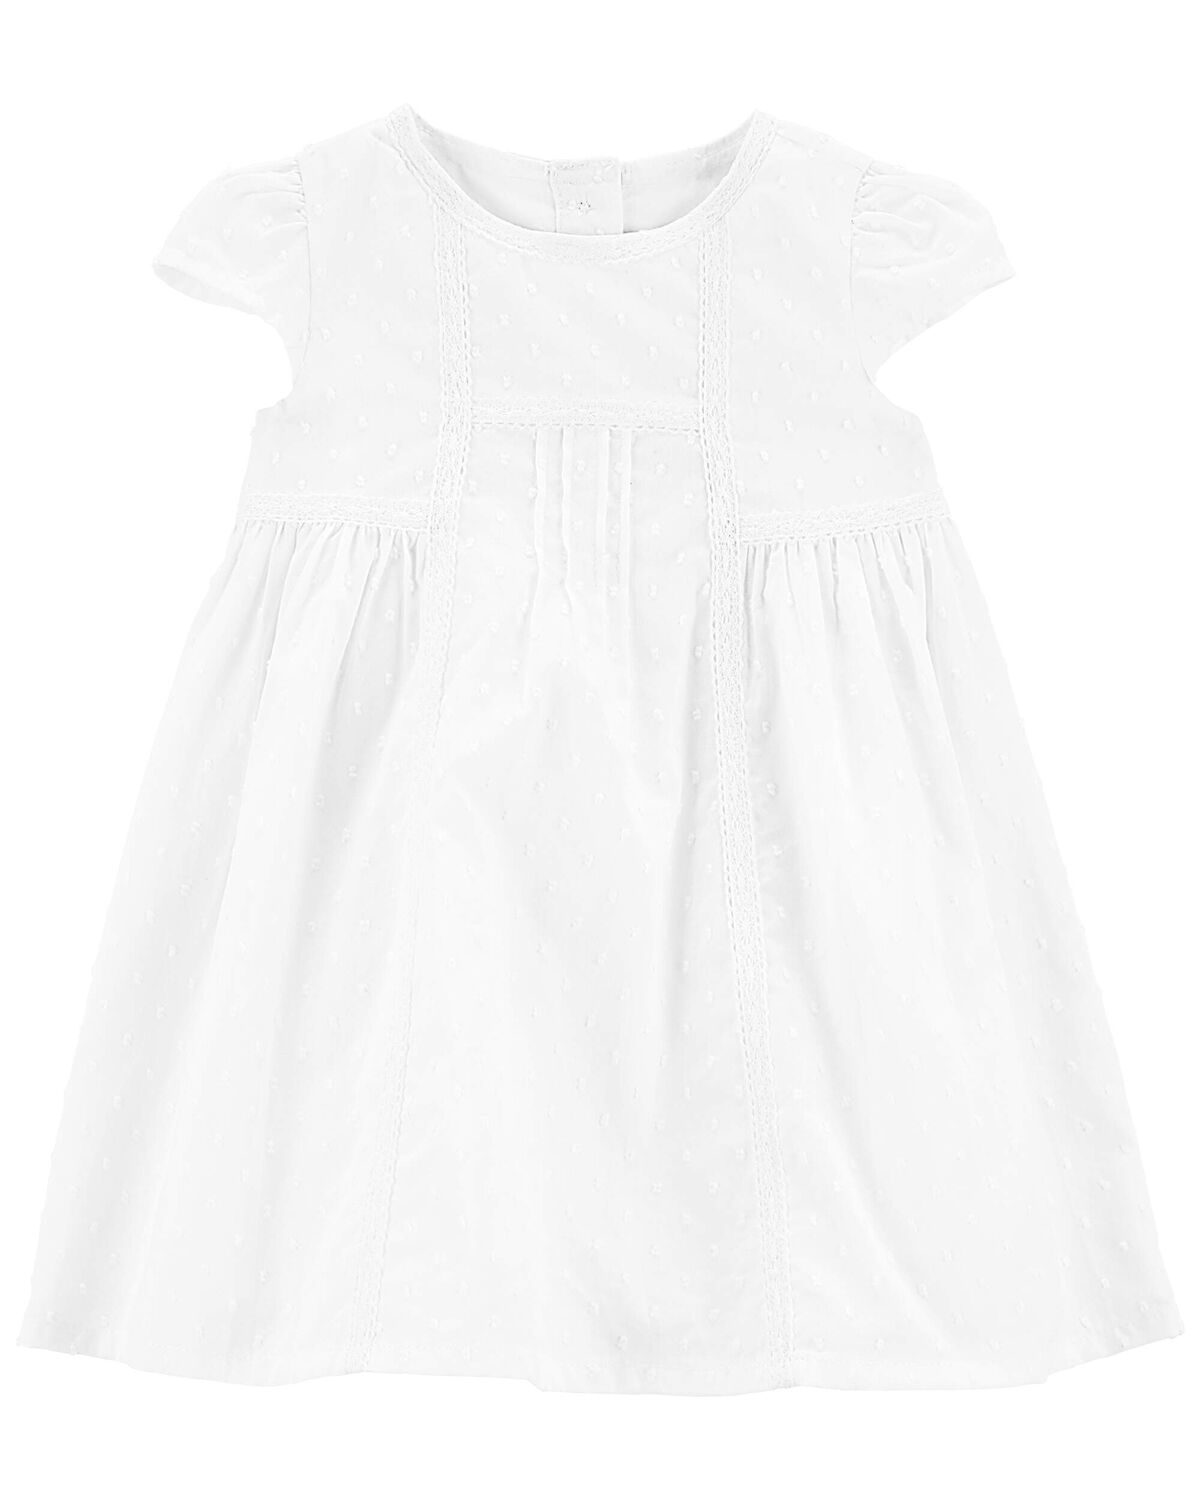 White Baby Textured Babydoll Dress | carters.com